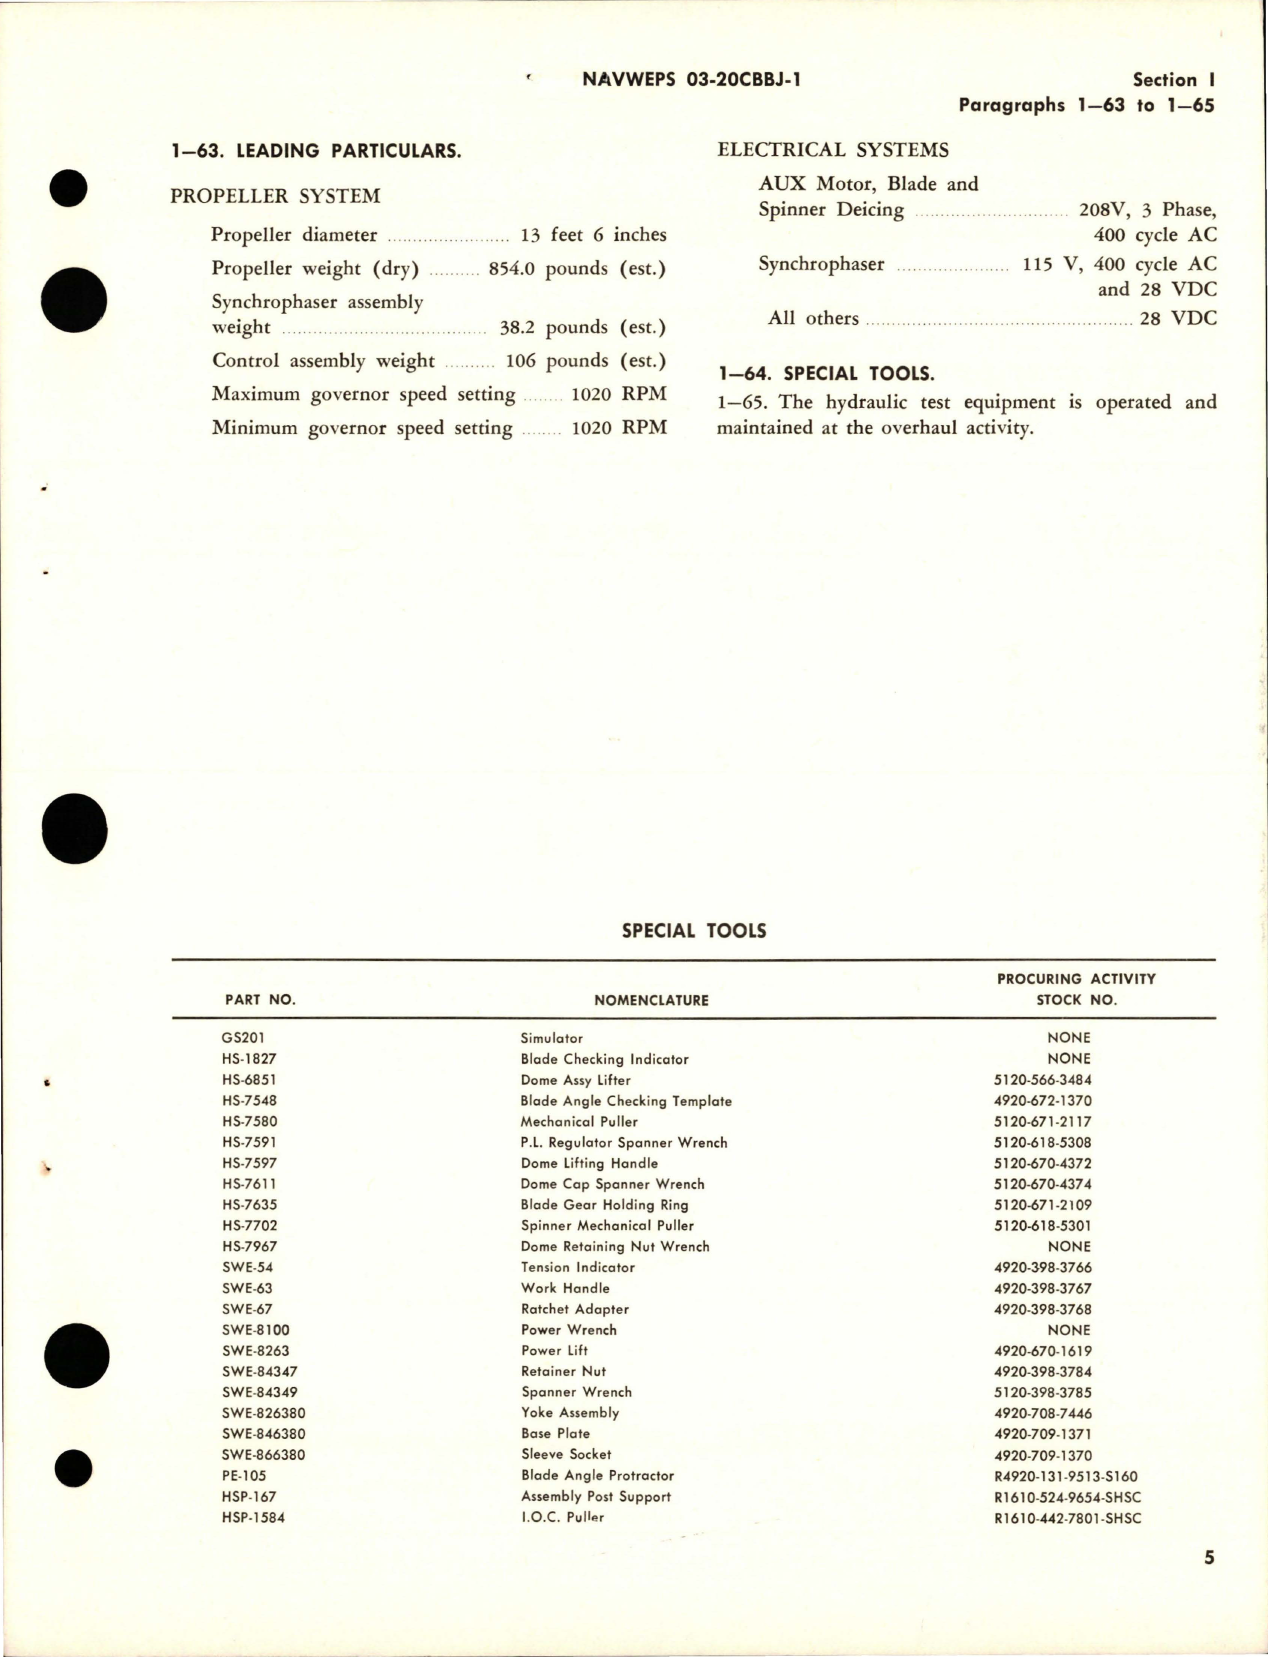 Sample page 9 from AirCorps Library document: Operation and Maintenance Instructions for Variable Pitch Propeller - Models 54H60-69, 54H60-73, and 54H60-75